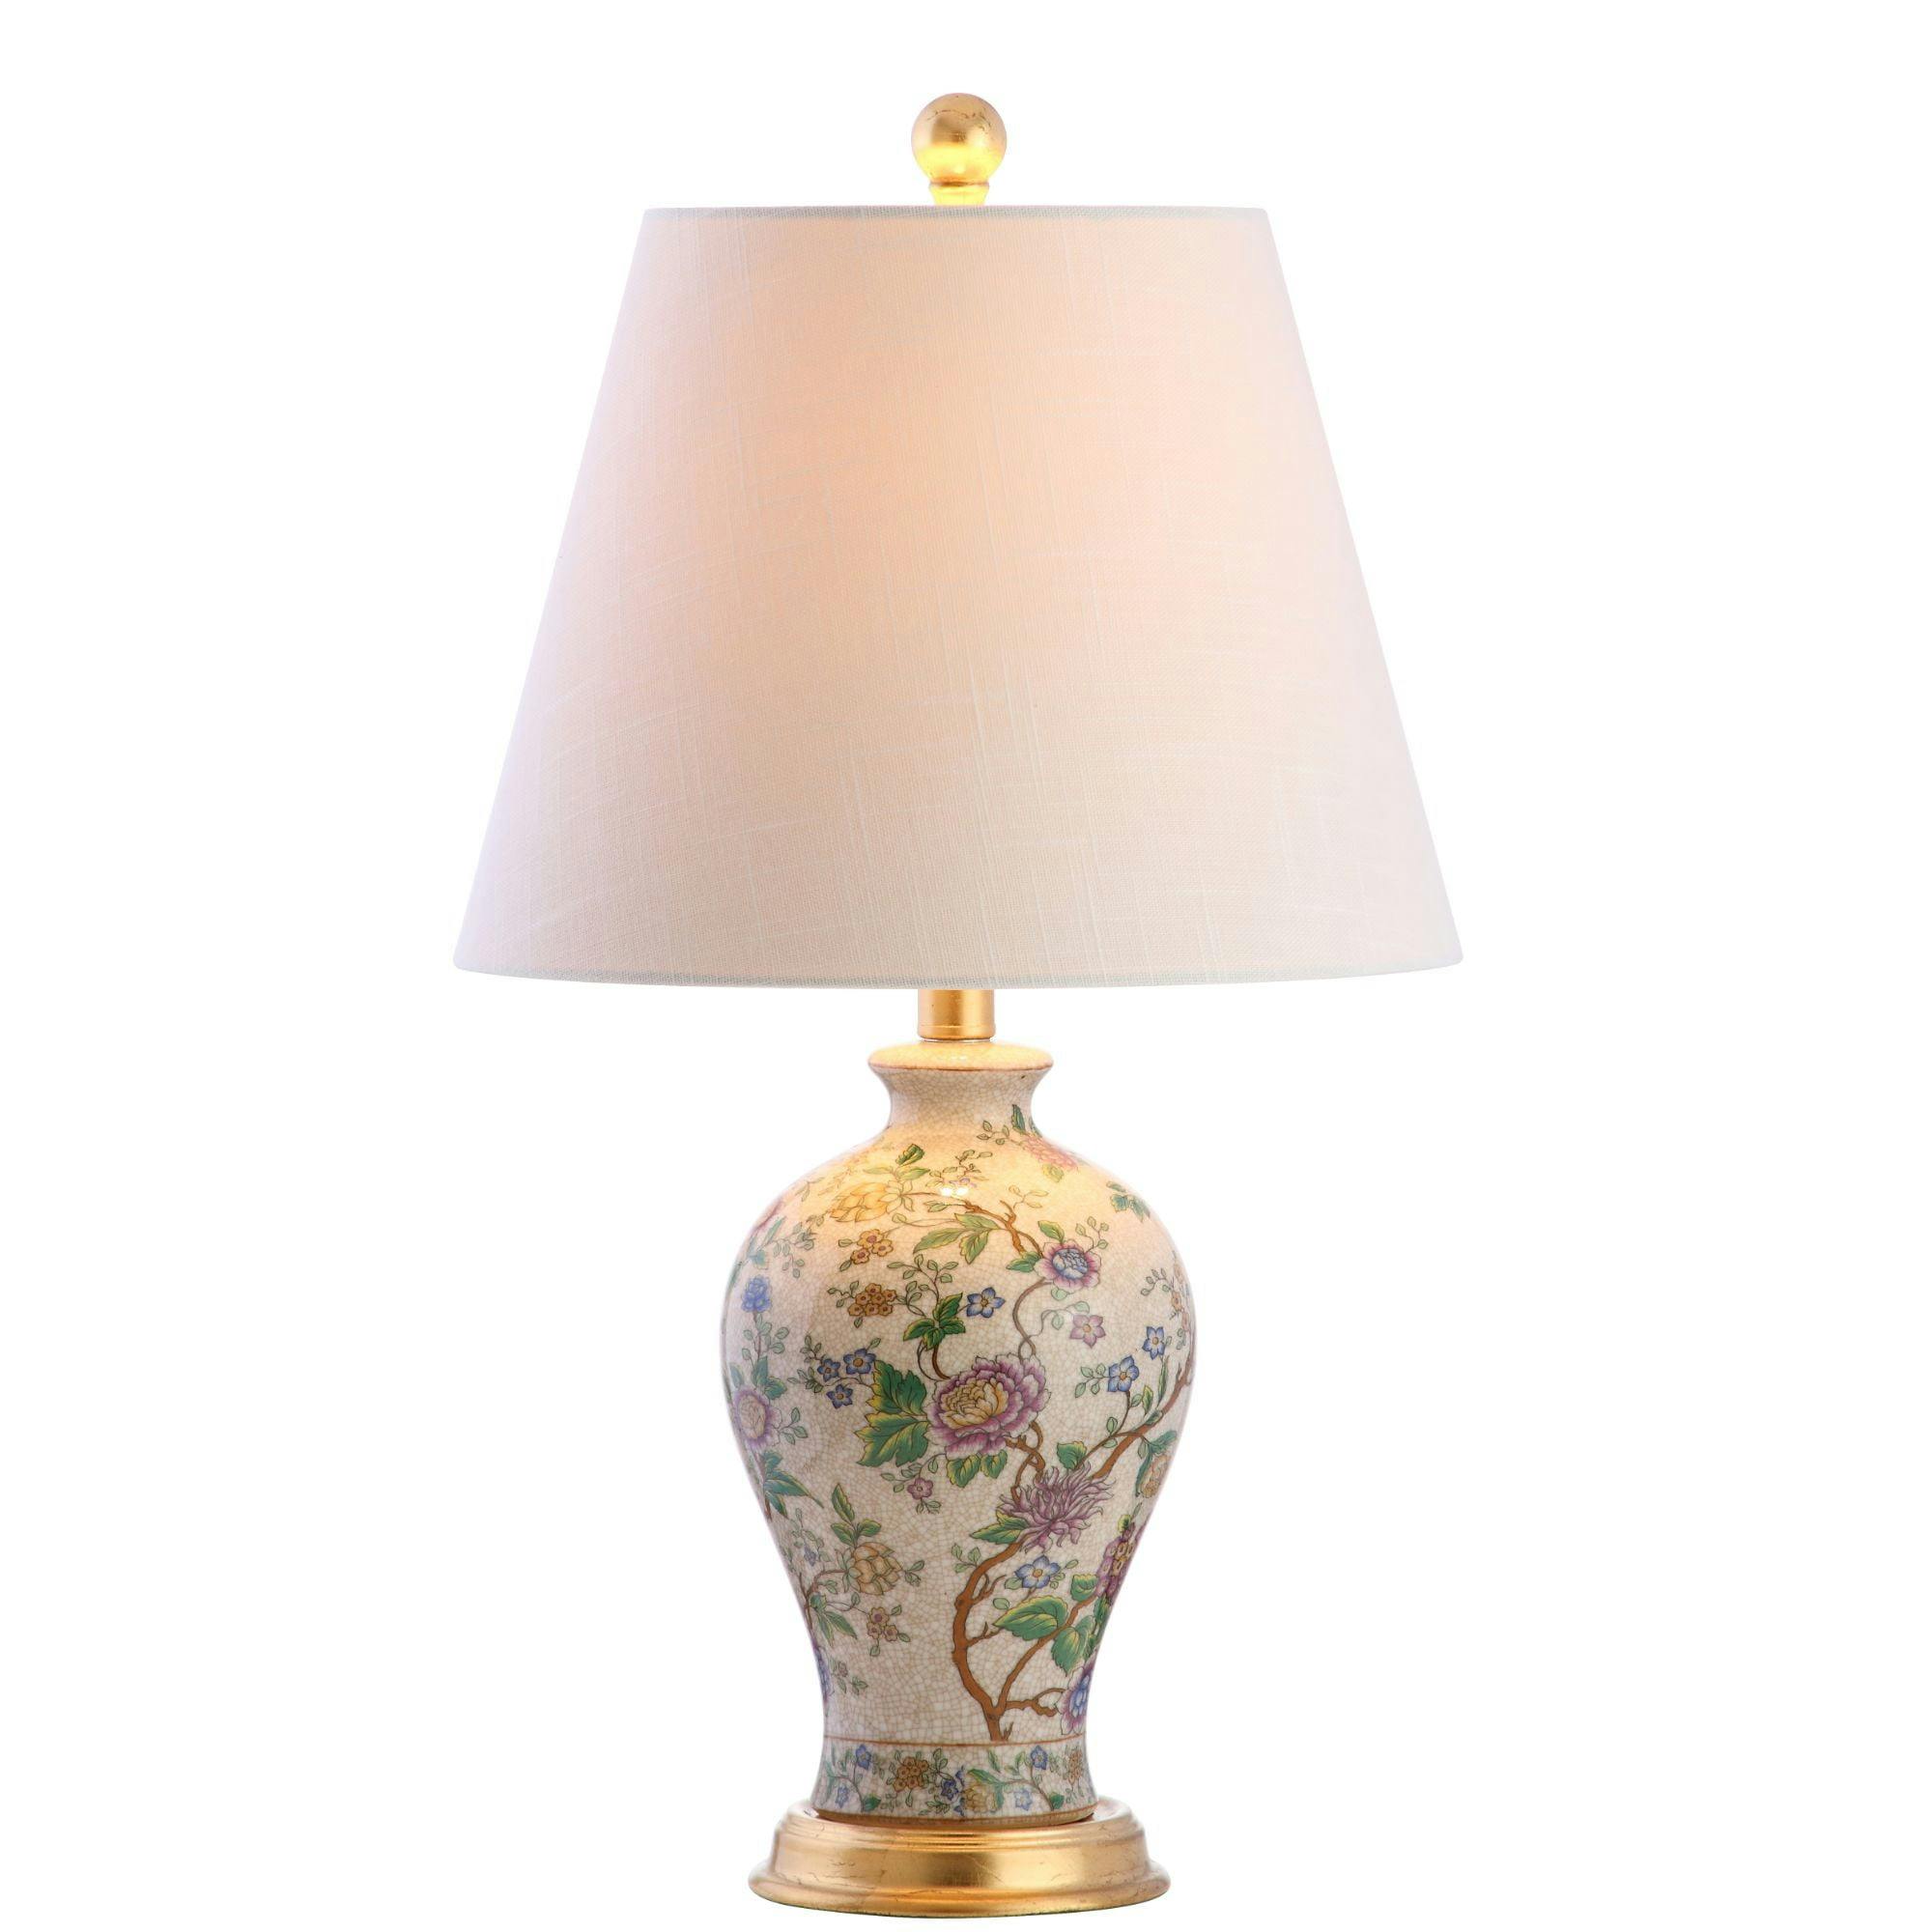 Grace Classic 24" White Linen Shade Table Lamp with Brass Accents